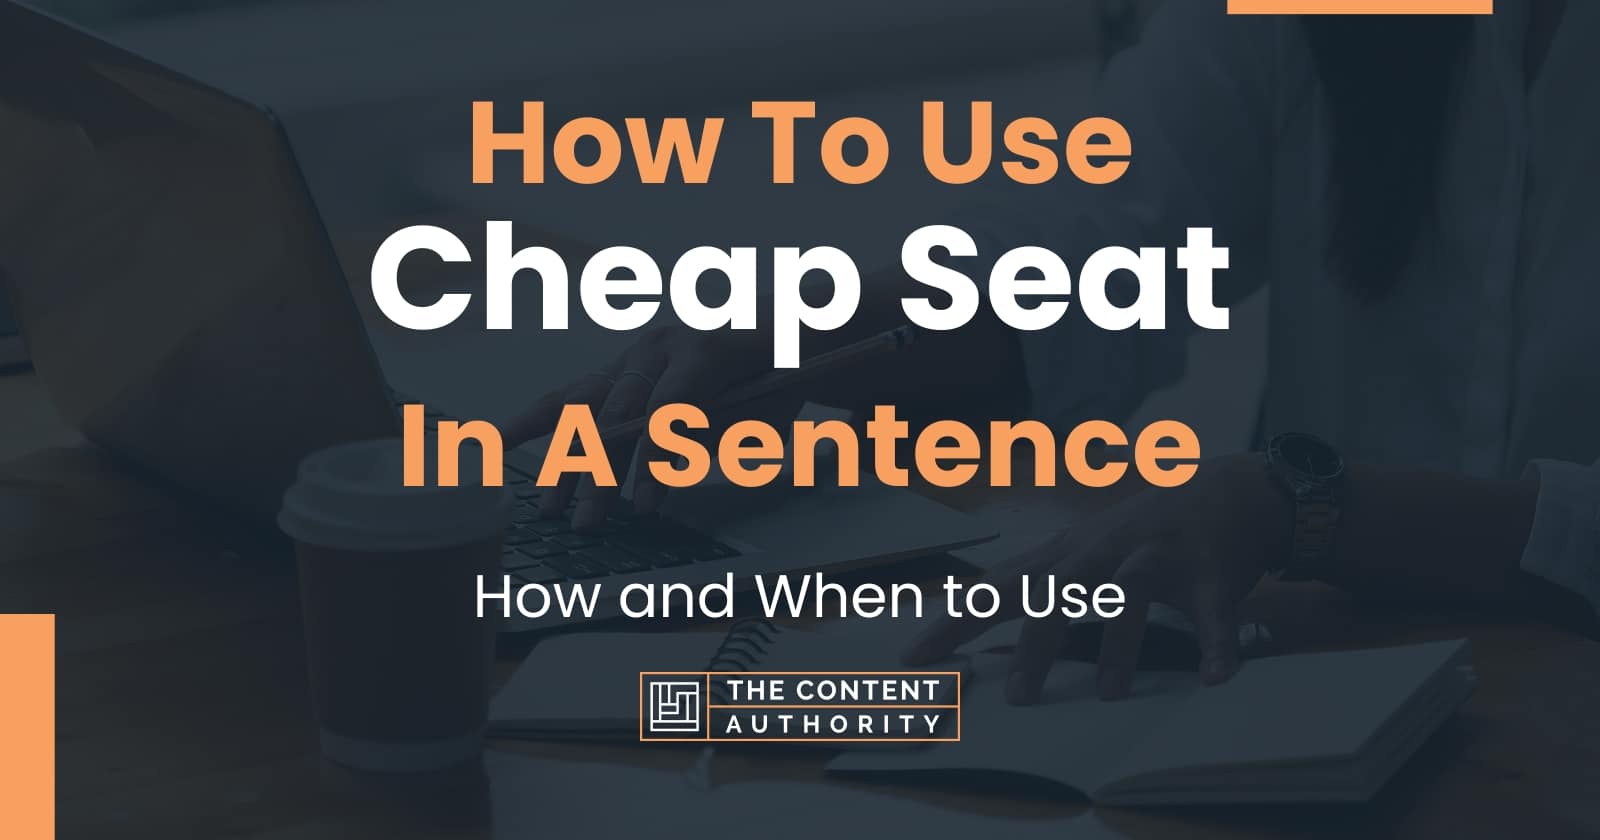 how-to-use-cheap-seat-in-a-sentence-how-and-when-to-use